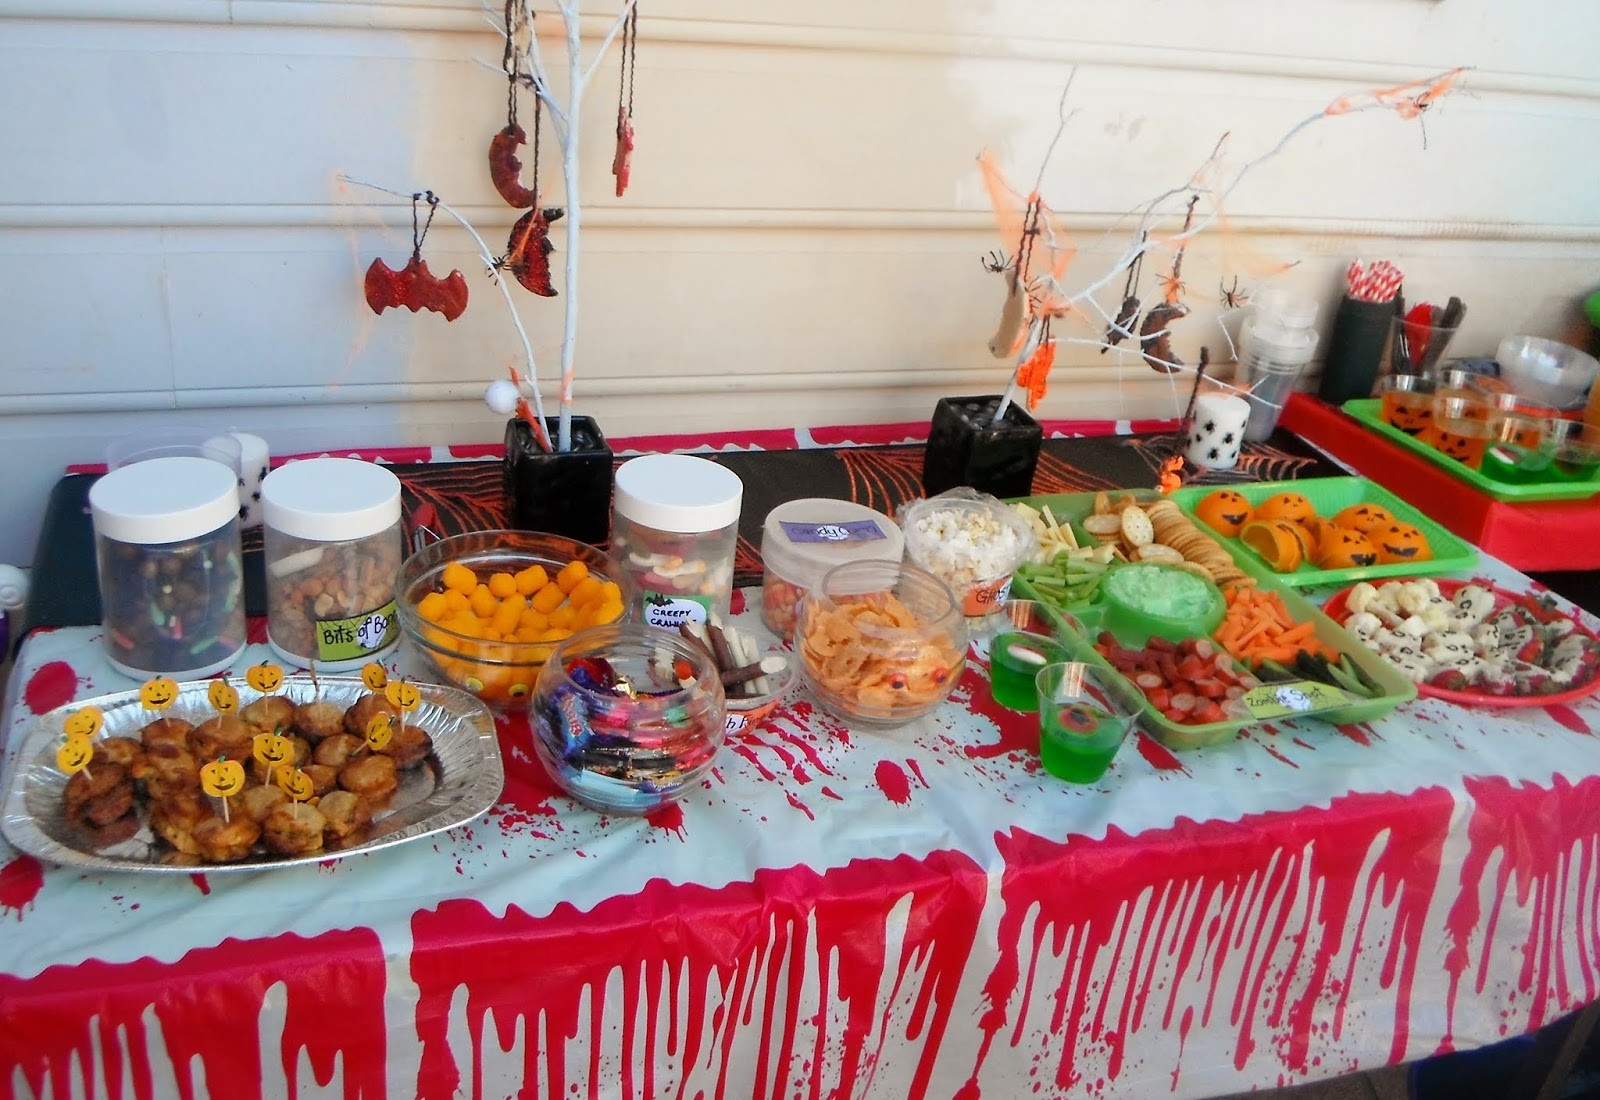 Children Birthday Party Food Ideas
 Adventures at home with Mum Halloween Party Food